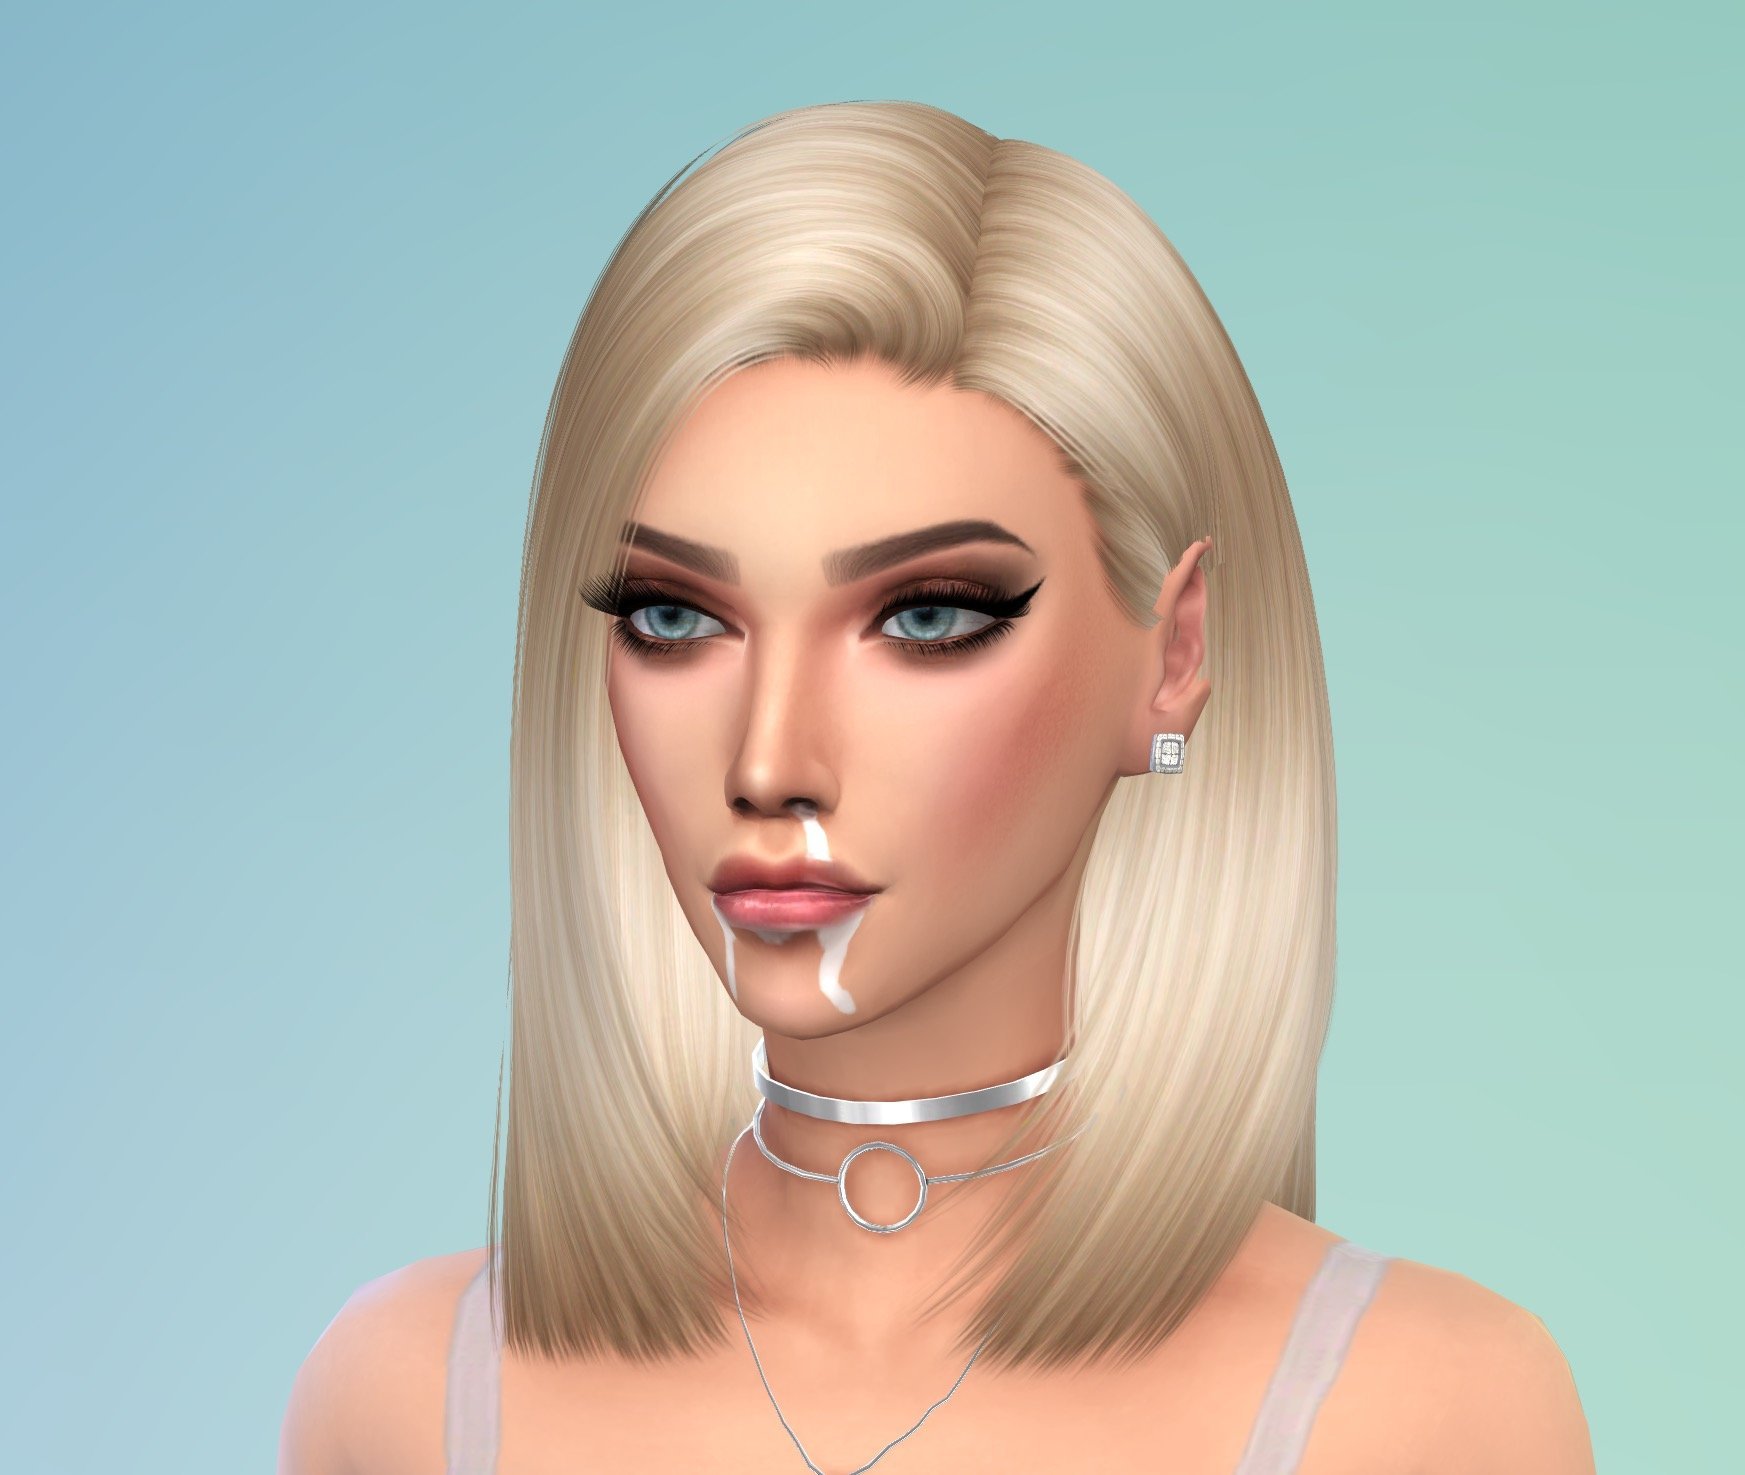 Stain on the face won t go away The Sims 4 Technical Support. www.loverslab...